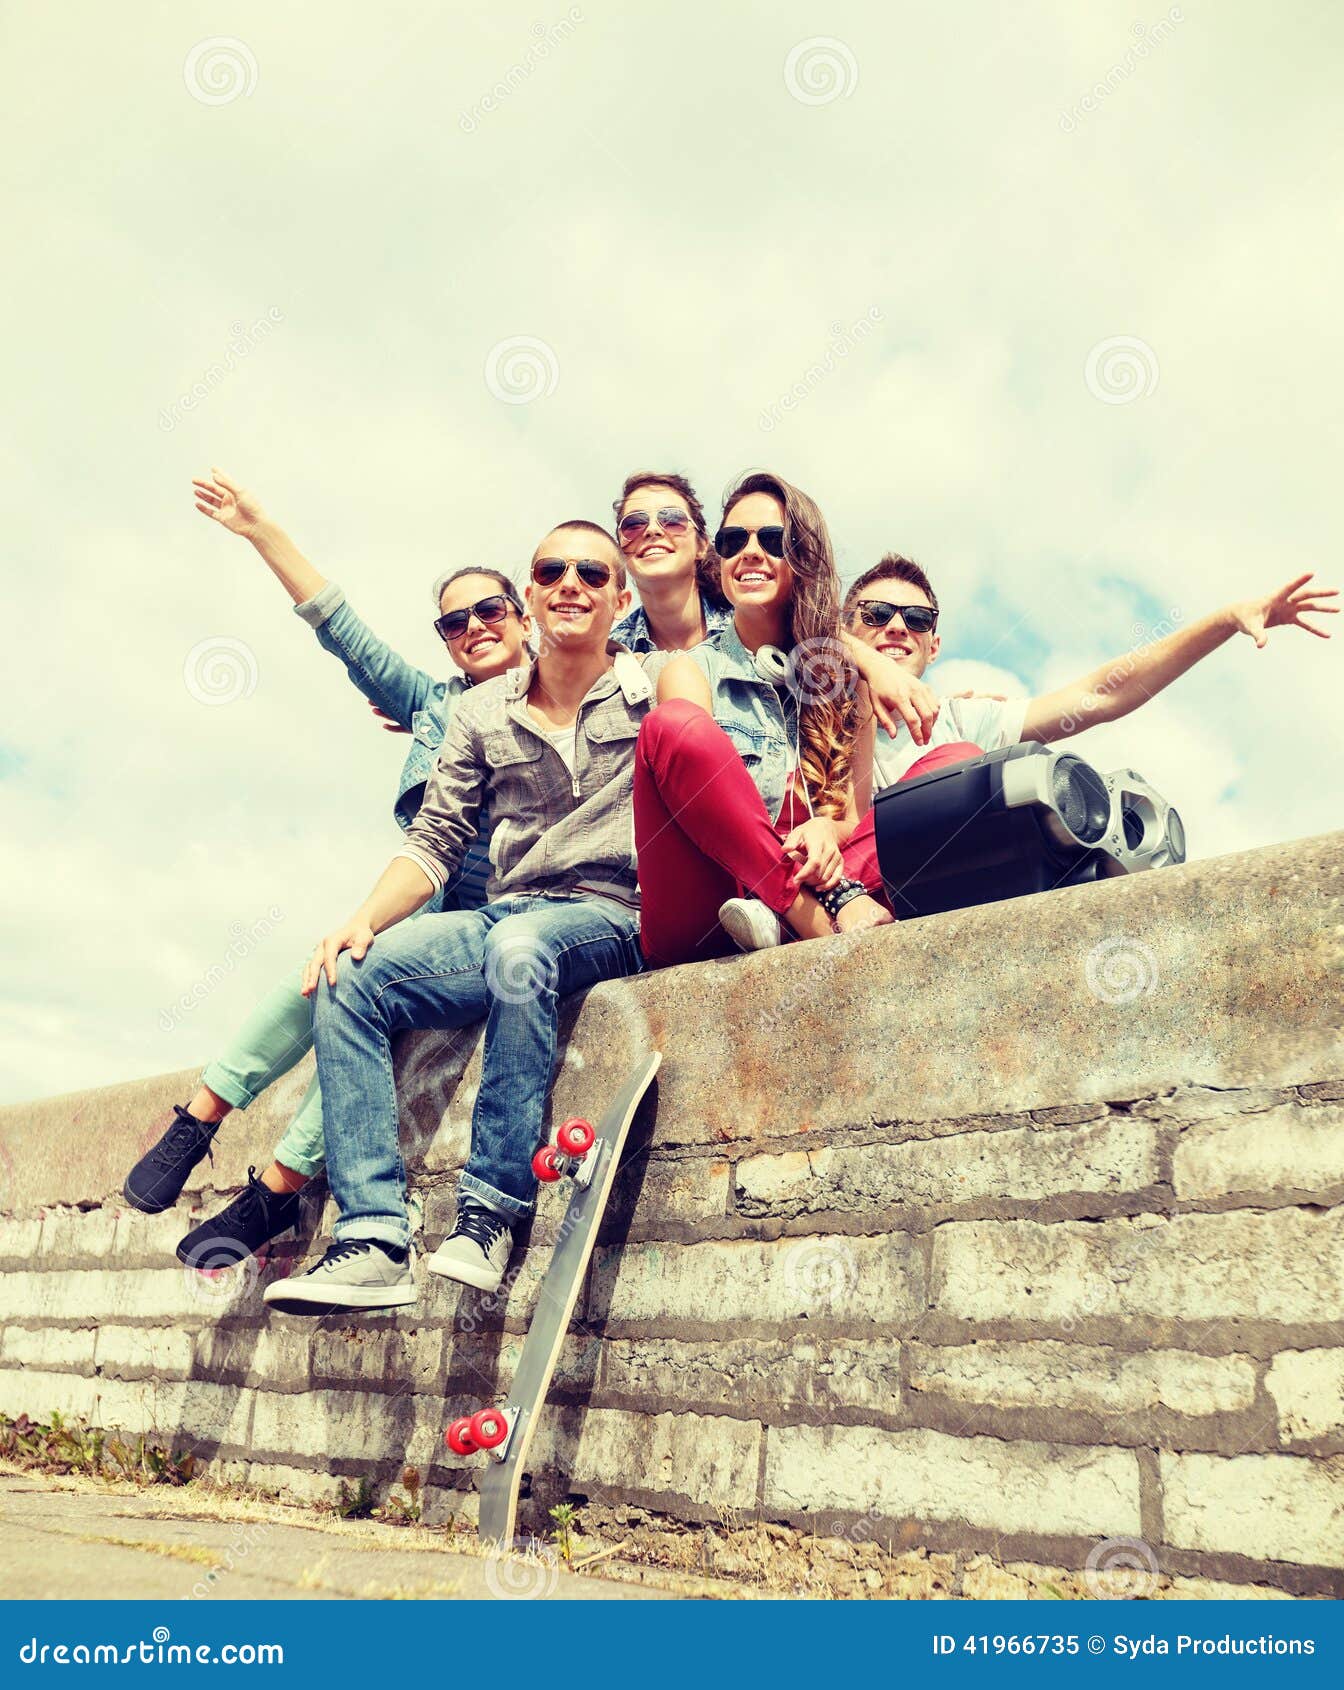 Group of Smiling Teenagers Hanging Out Stock Image - Image of smiling,  boyfriends: 41966735